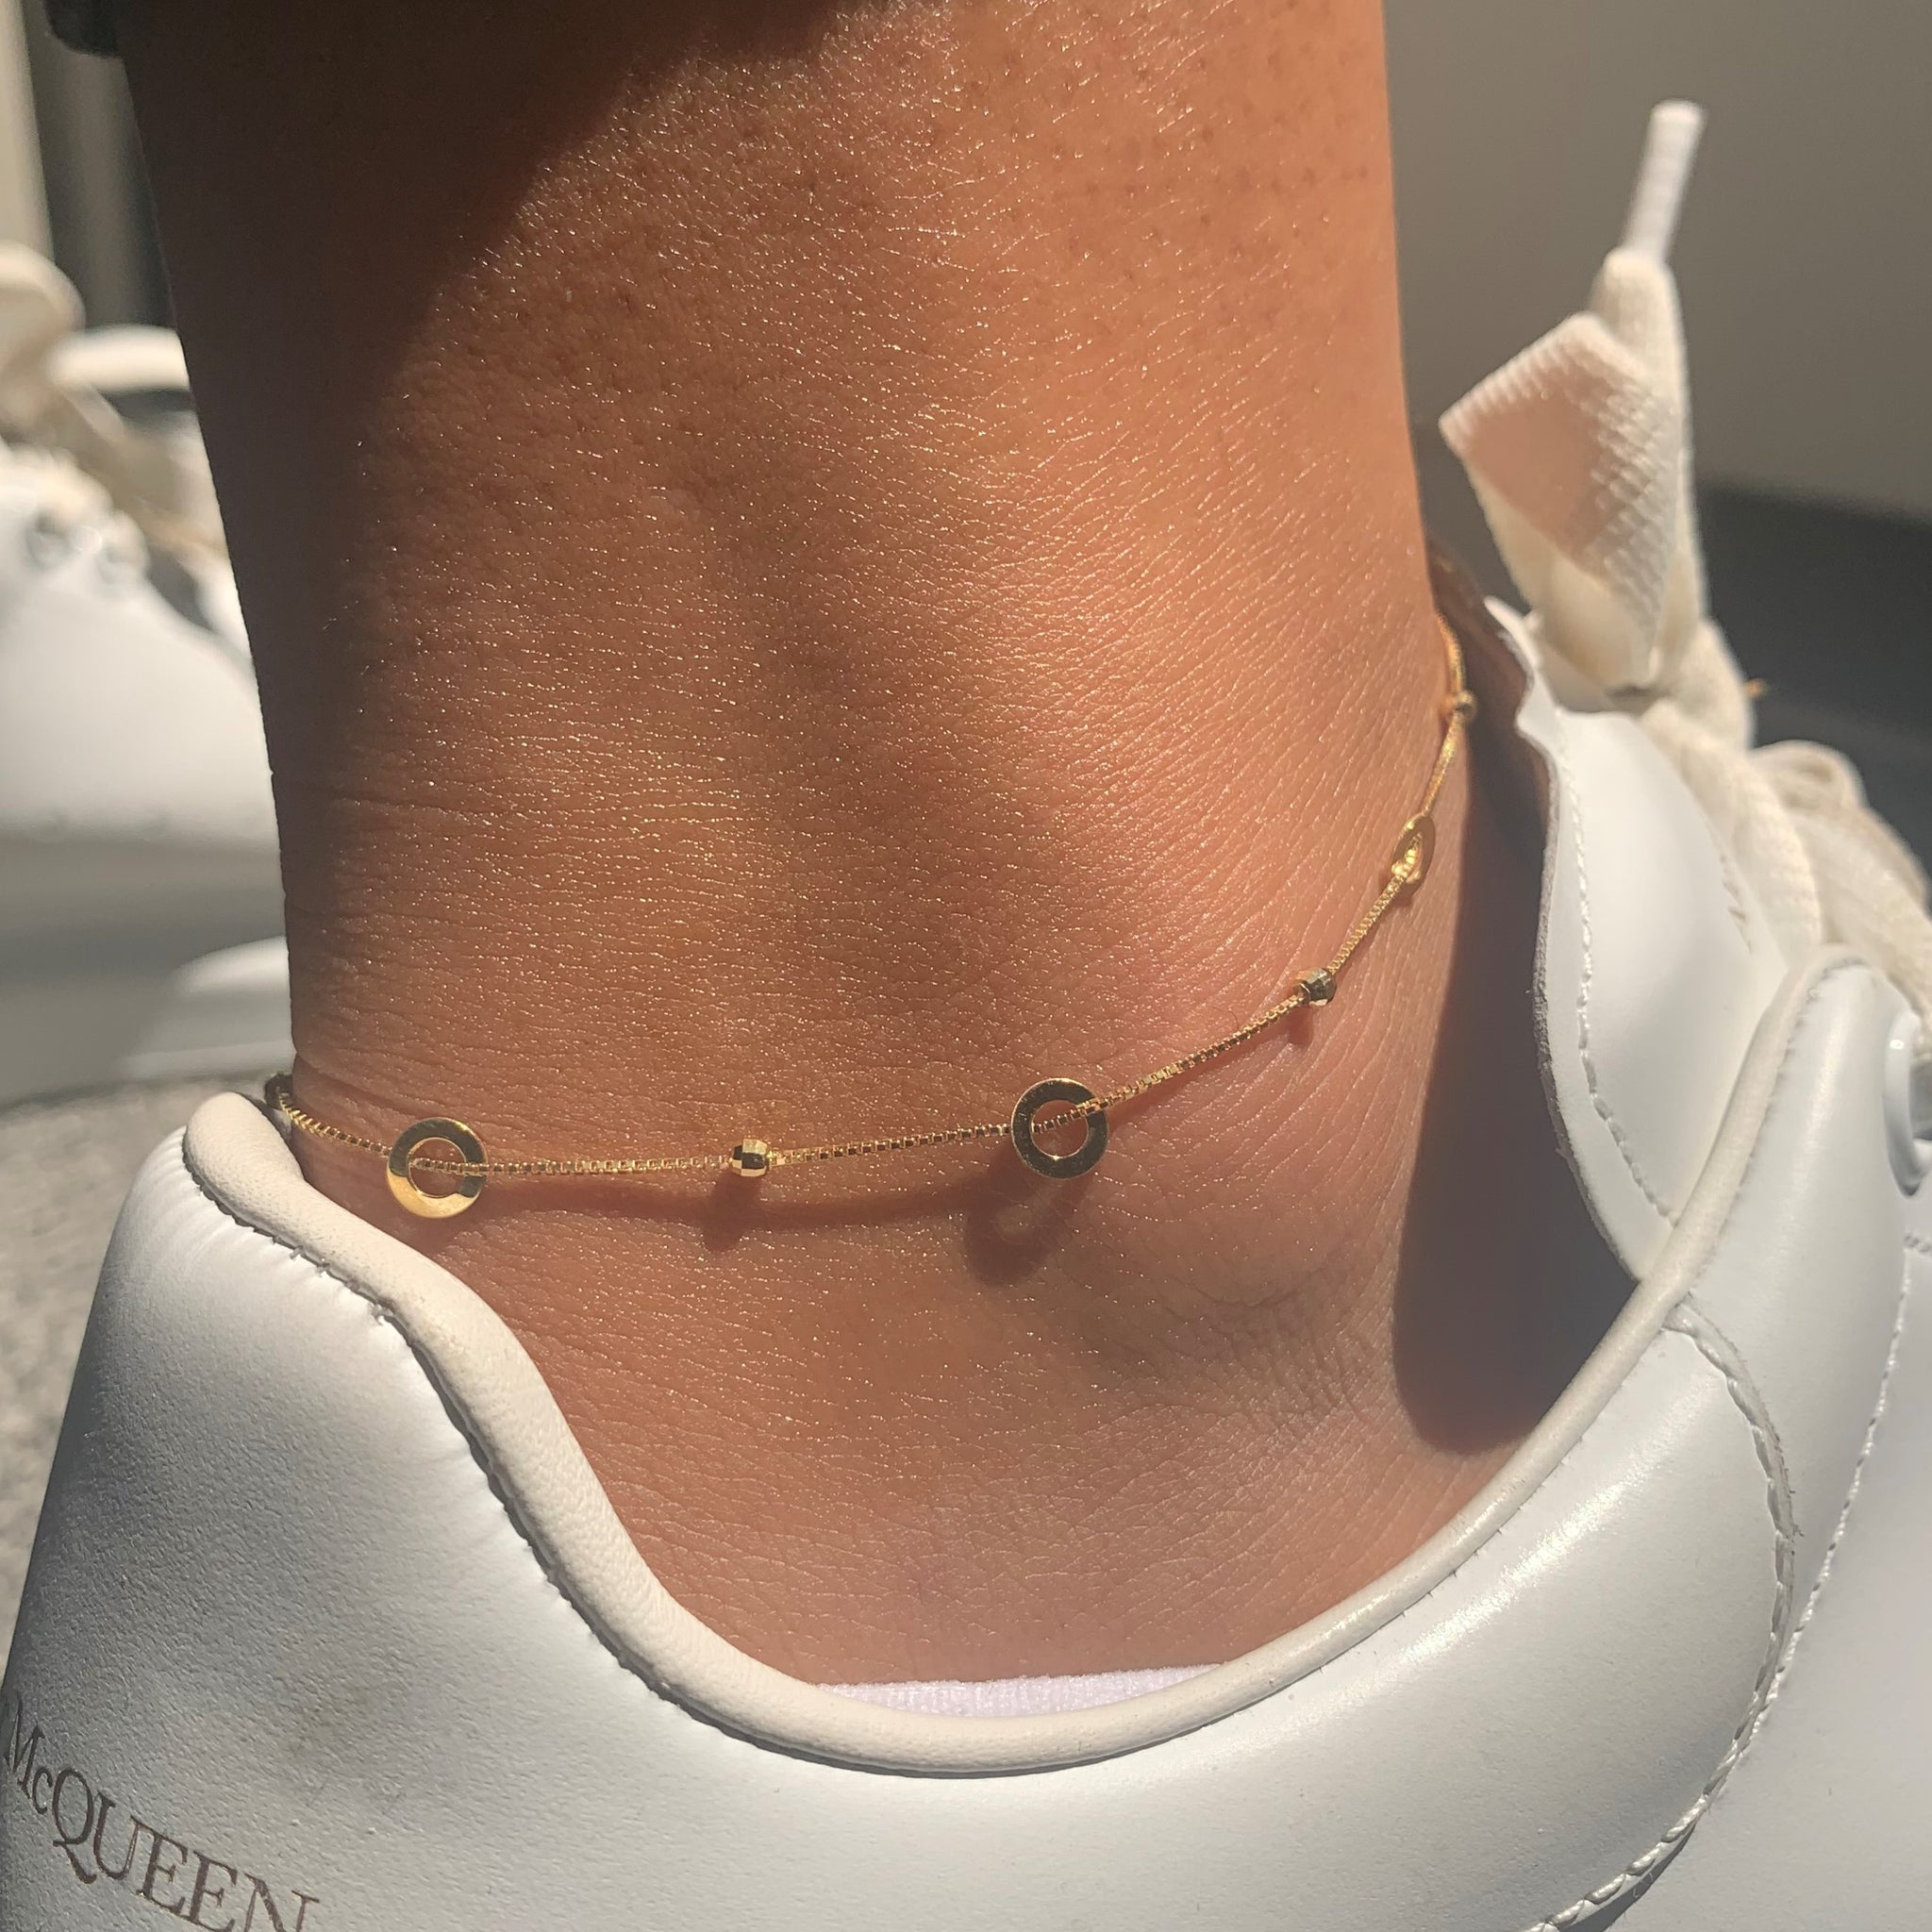 2 Piece Gold Stacking Ankle Bracelet Set- 1 Gold Chunky Anklet & 1 Beaded  Anklet | Ankle bracelets, Anklet, Chunky gold chain